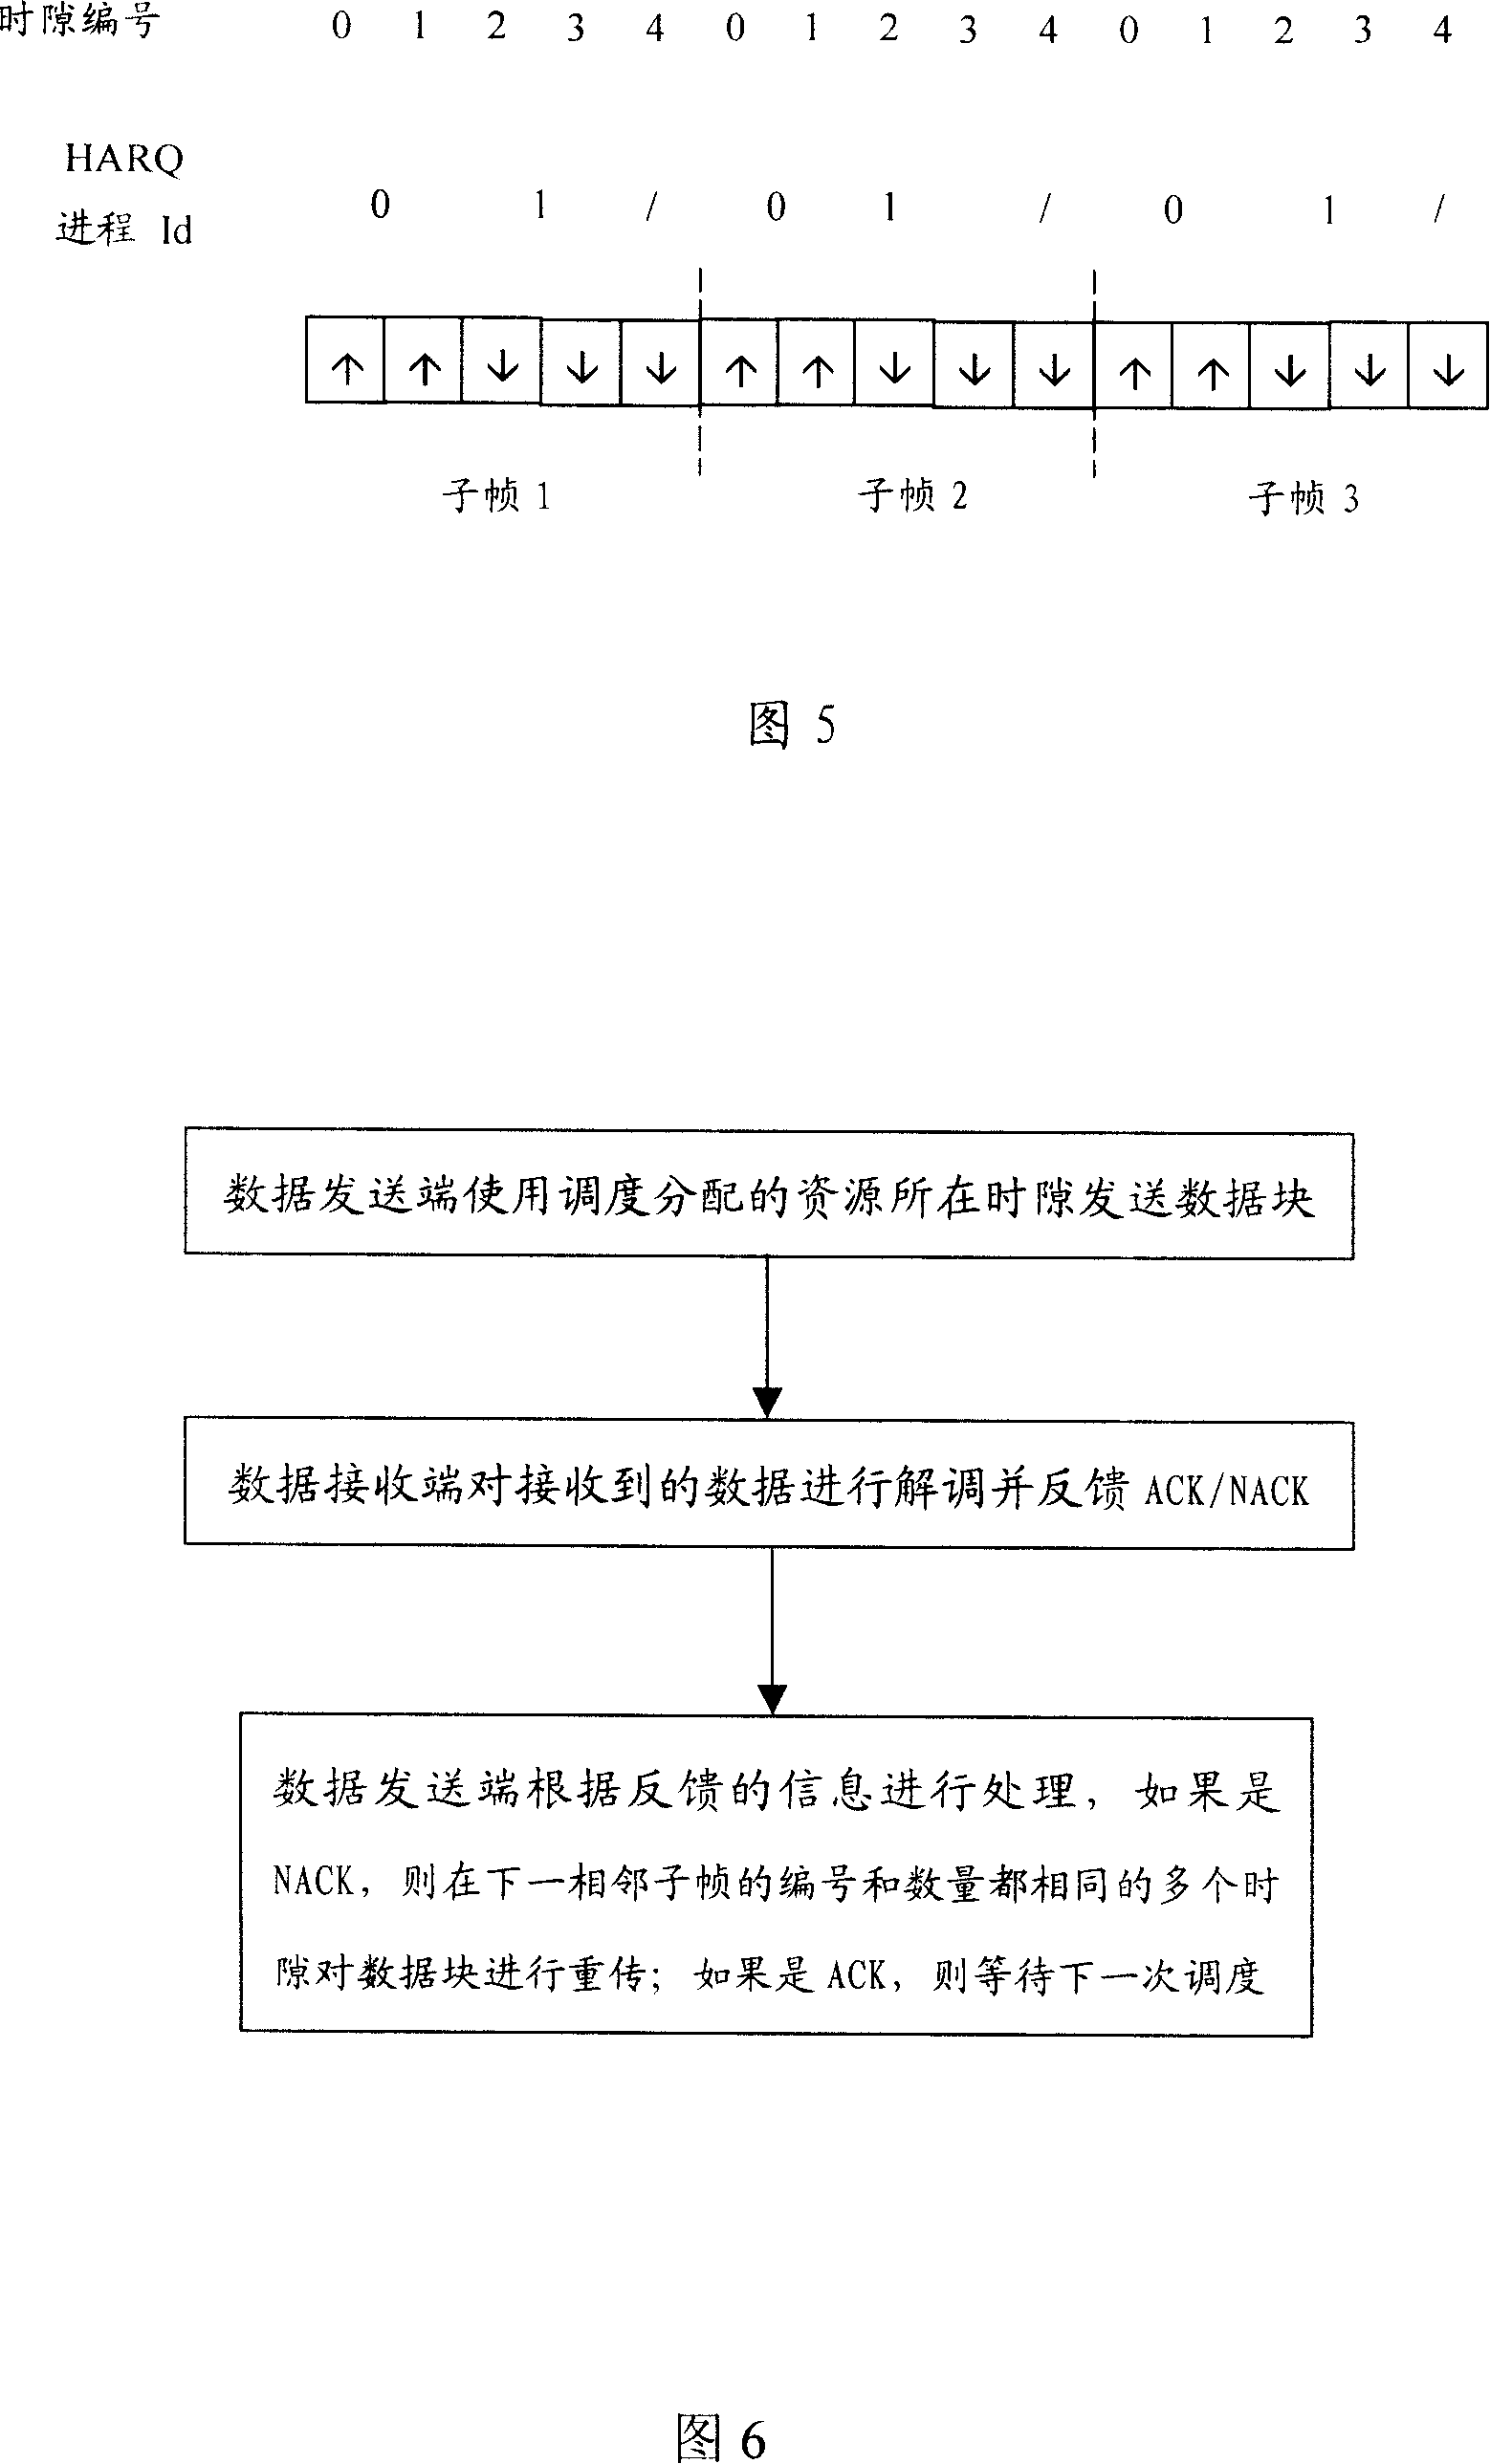 Method for implementing synchronous HARQ in TDD system and data transmission